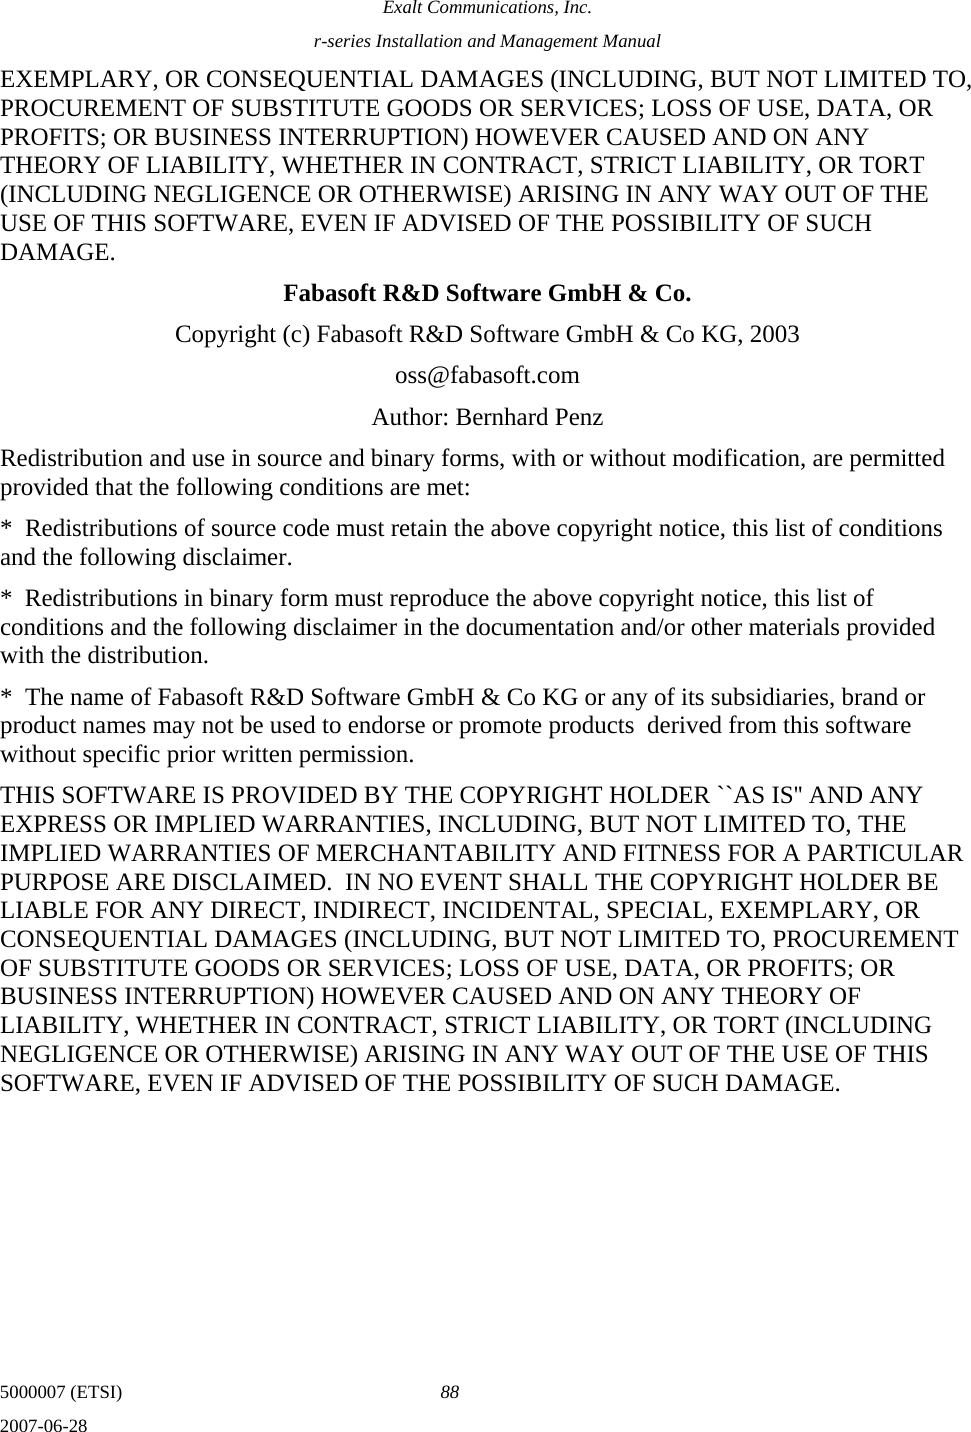 Exalt Communications, Inc. r-series Installation and Management Manual 5000007 (ETSI)  88 2007-06-28  EXEMPLARY, OR CONSEQUENTIAL DAMAGES (INCLUDING, BUT NOT LIMITED TO, PROCUREMENT OF SUBSTITUTE GOODS OR SERVICES; LOSS OF USE, DATA, OR PROFITS; OR BUSINESS INTERRUPTION) HOWEVER CAUSED AND ON ANY THEORY OF LIABILITY, WHETHER IN CONTRACT, STRICT LIABILITY, OR TORT (INCLUDING NEGLIGENCE OR OTHERWISE) ARISING IN ANY WAY OUT OF THE USE OF THIS SOFTWARE, EVEN IF ADVISED OF THE POSSIBILITY OF SUCH DAMAGE. Fabasoft R&amp;D Software GmbH &amp; Co. Copyright (c) Fabasoft R&amp;D Software GmbH &amp; Co KG, 2003 oss@fabasoft.com Author: Bernhard Penz Redistribution and use in source and binary forms, with or without modification, are permitted provided that the following conditions are met: *  Redistributions of source code must retain the above copyright notice, this list of conditions and the following disclaimer. *  Redistributions in binary form must reproduce the above copyright notice, this list of conditions and the following disclaimer in the documentation and/or other materials provided with the distribution. *  The name of Fabasoft R&amp;D Software GmbH &amp; Co KG or any of its subsidiaries, brand or product names may not be used to endorse or promote products  derived from this software without specific prior written permission. THIS SOFTWARE IS PROVIDED BY THE COPYRIGHT HOLDER ``AS IS&apos;&apos; AND ANY EXPRESS OR IMPLIED WARRANTIES, INCLUDING, BUT NOT LIMITED TO, THE IMPLIED WARRANTIES OF MERCHANTABILITY AND FITNESS FOR A PARTICULAR PURPOSE ARE DISCLAIMED.  IN NO EVENT SHALL THE COPYRIGHT HOLDER BE LIABLE FOR ANY DIRECT, INDIRECT, INCIDENTAL, SPECIAL, EXEMPLARY, OR CONSEQUENTIAL DAMAGES (INCLUDING, BUT NOT LIMITED TO, PROCUREMENT OF SUBSTITUTE GOODS OR SERVICES; LOSS OF USE, DATA, OR PROFITS; OR BUSINESS INTERRUPTION) HOWEVER CAUSED AND ON ANY THEORY OF LIABILITY, WHETHER IN CONTRACT, STRICT LIABILITY, OR TORT (INCLUDING NEGLIGENCE OR OTHERWISE) ARISING IN ANY WAY OUT OF THE USE OF THIS SOFTWARE, EVEN IF ADVISED OF THE POSSIBILITY OF SUCH DAMAGE.    